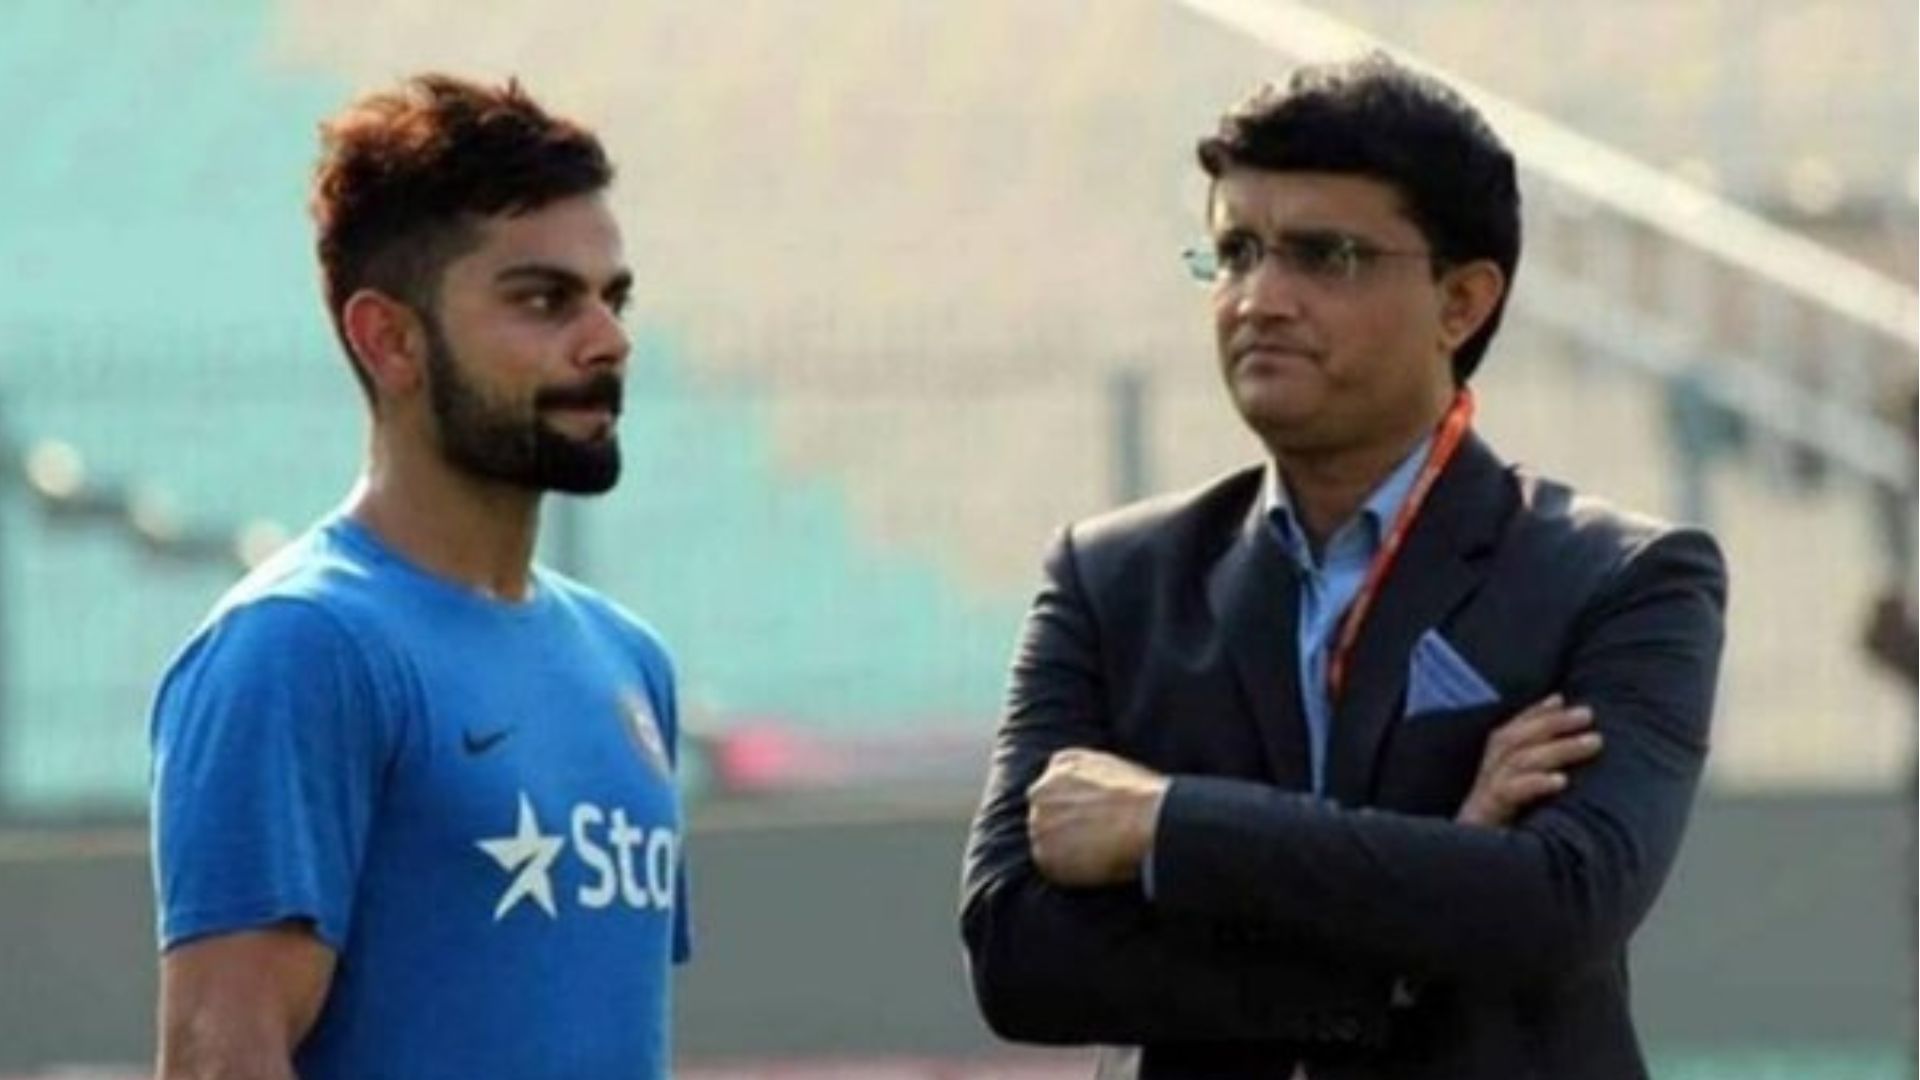 Sourav Ganguly and Virat Kohli had a fallout very recently